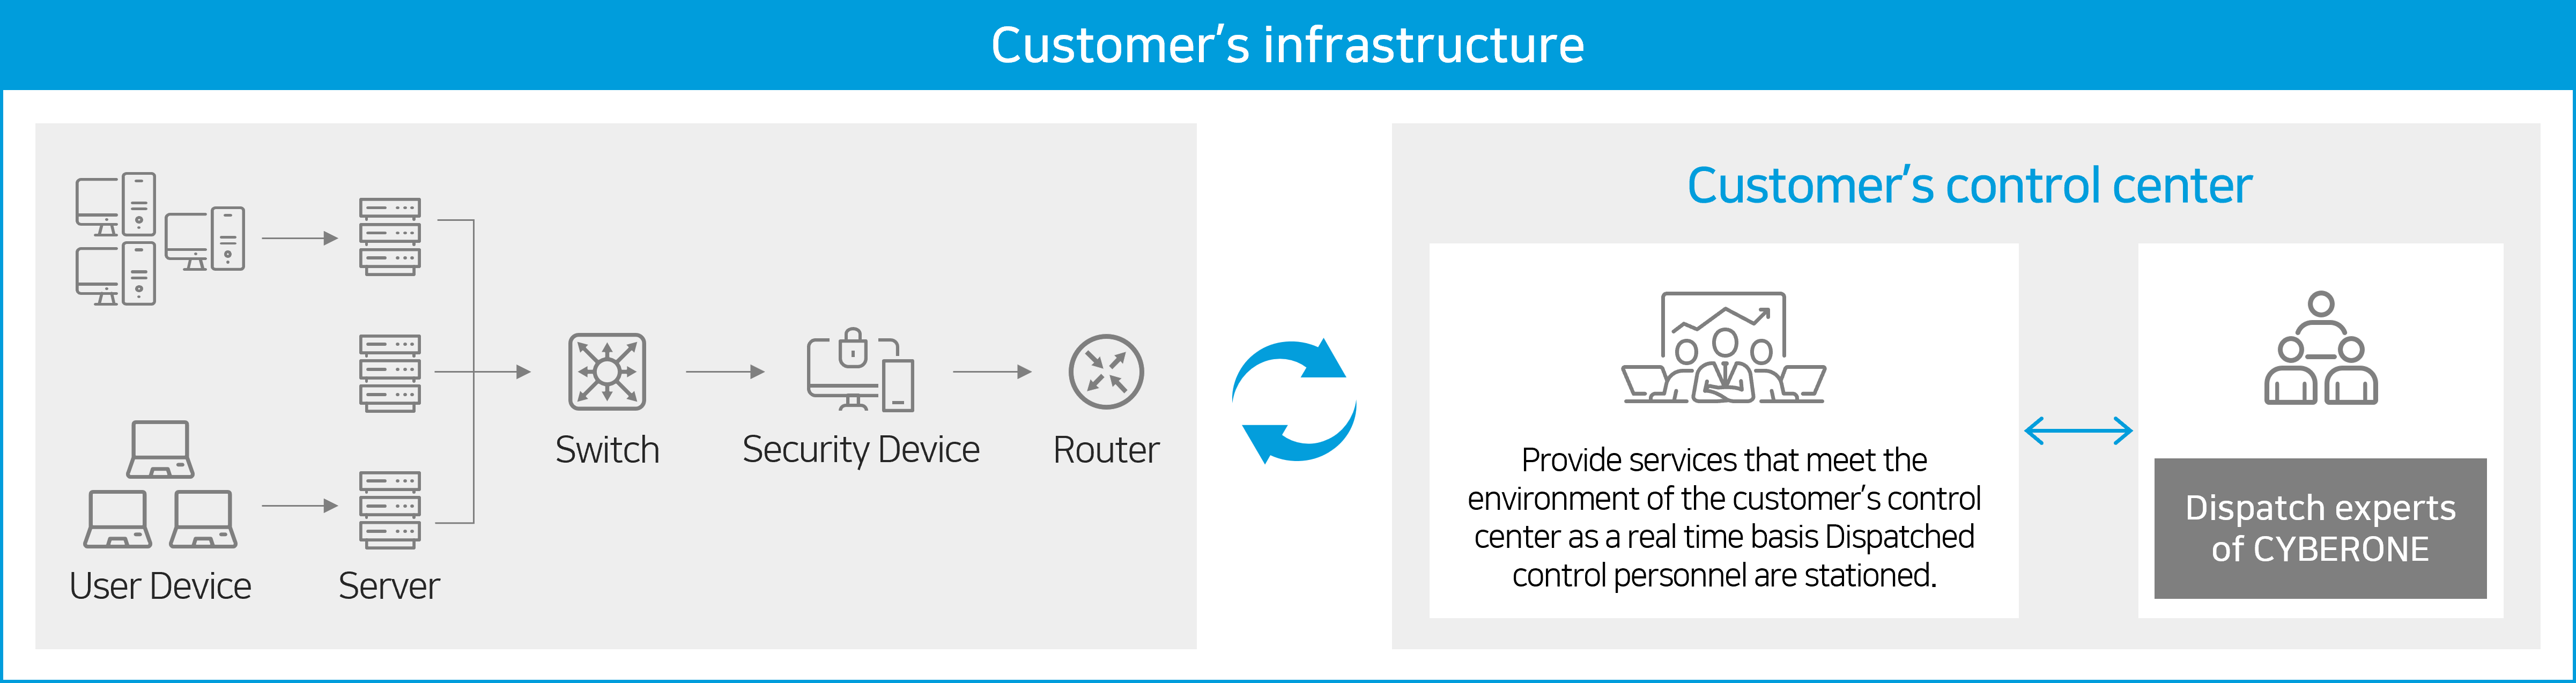 Image of customer infrastructure guide